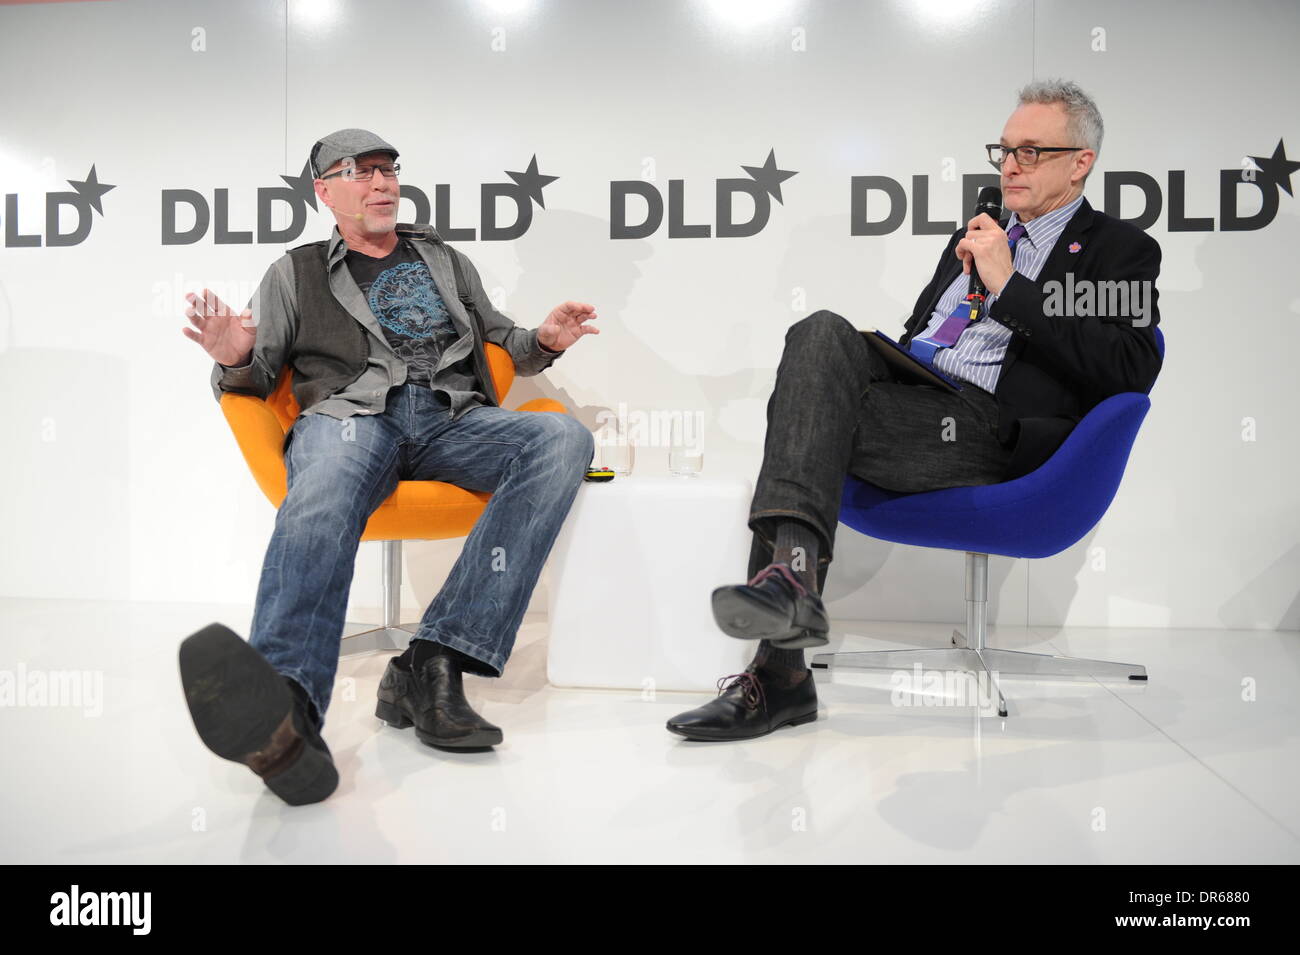 MUNICH/GERMANY - JANUARY 20: David Kirkpatrick (Techonomy, r.) speaks with James Whittaker (Microsoft, l.) on the podium during the Digital Life Design (DLD) Conference at the HVB Forum on January 20, 2014 in Munich, Germany. DLD is a global network on innovation, digitization, science and culture which connects business, creative and social leaders, opinion-formers and influencers for crossover conversation and inspiration. (Photo: picture alliance / Jan Haas) Stock Photo